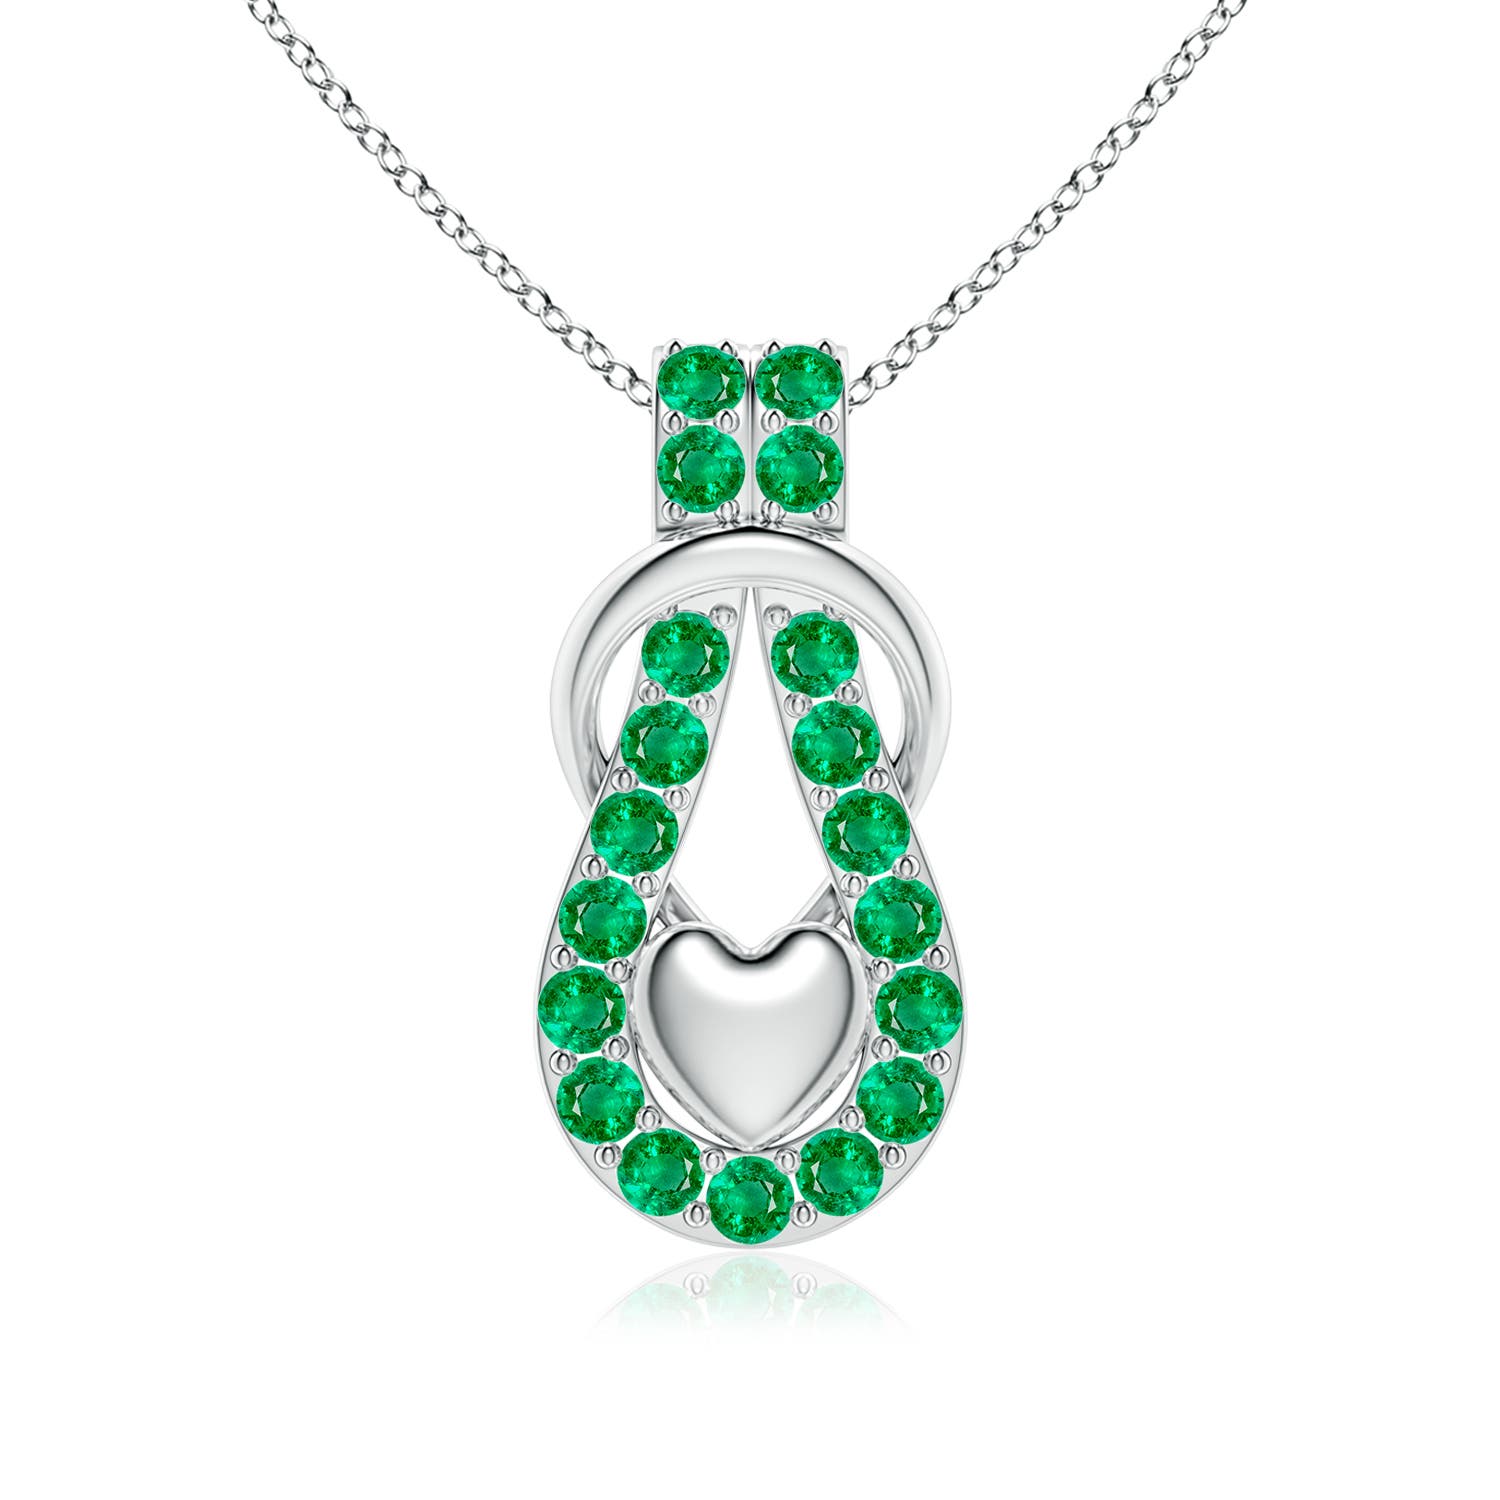 AAA - Emerald / 1.9 CT / 14 KT White Gold